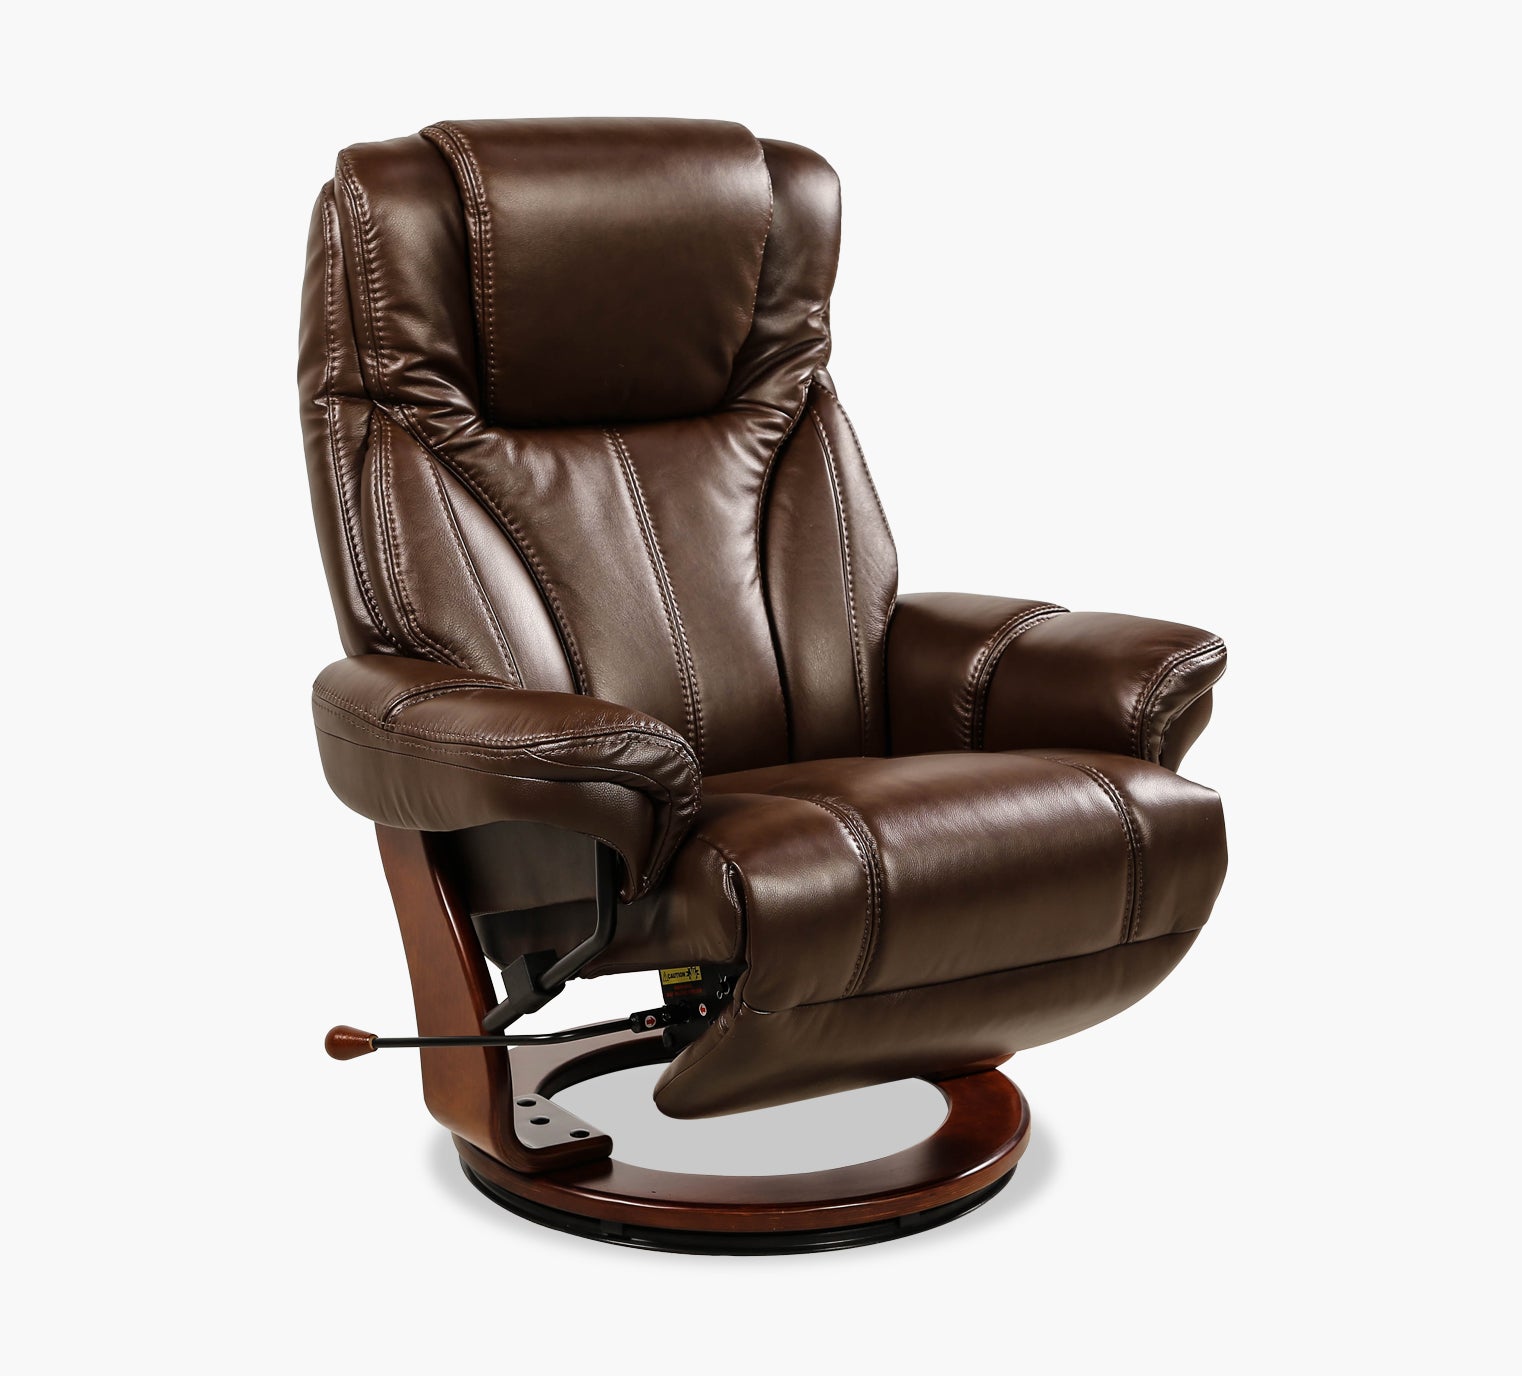 Carter Leather Swivel Chair Recliner Kane S Furniture